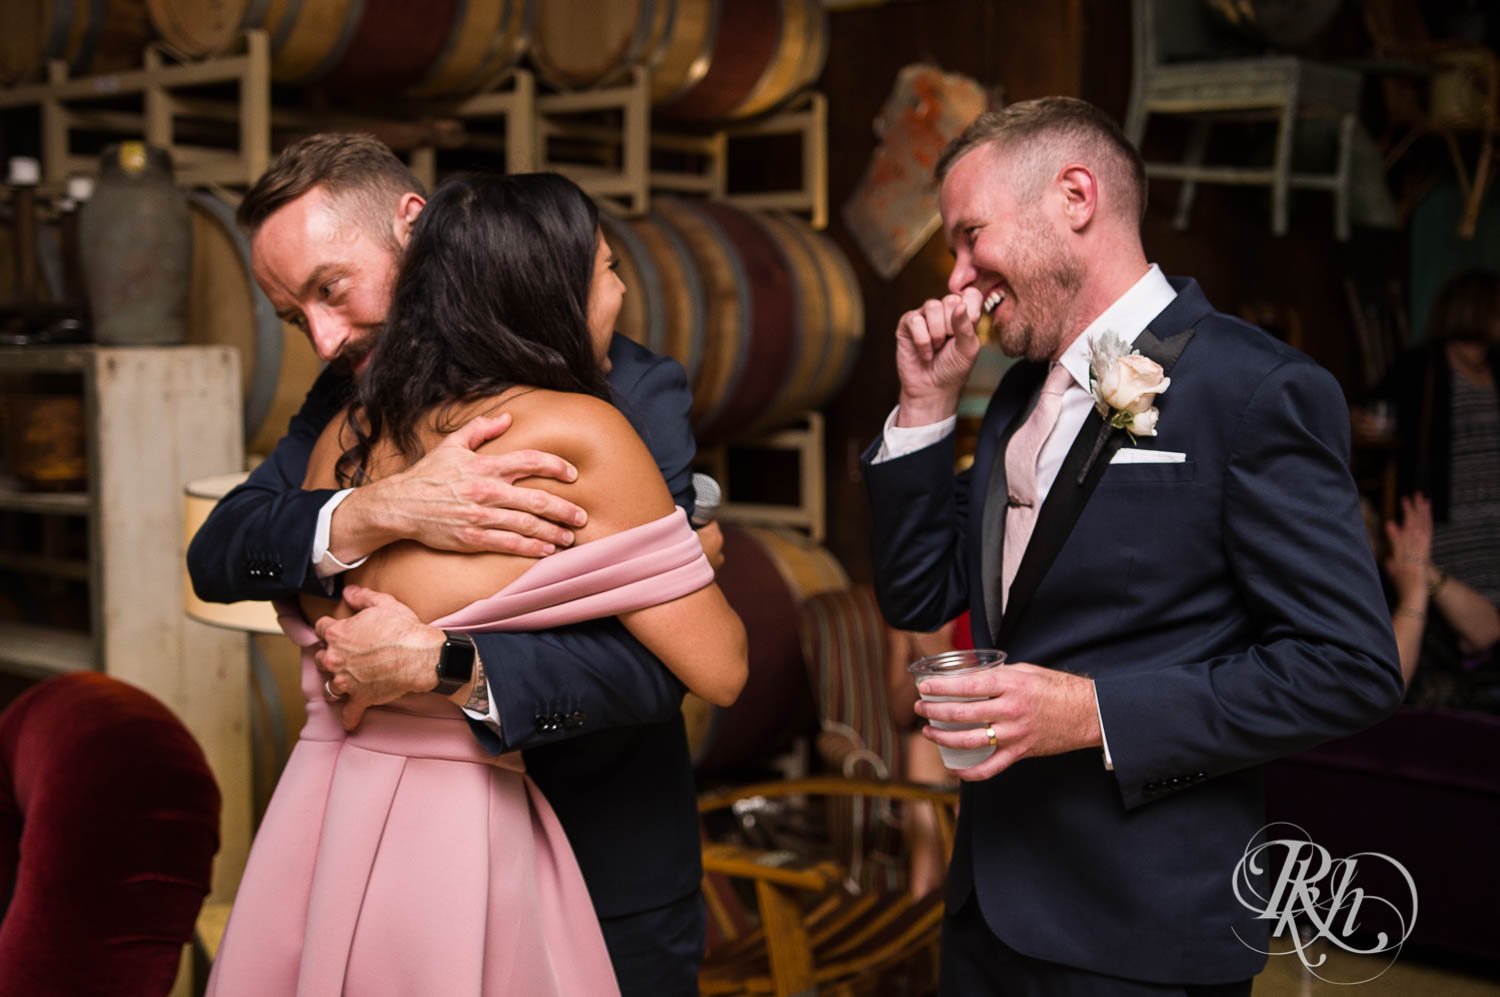 Grooms laugh during wedding reception speeches at Warehouse Winery wedding in Saint Louis Park, Minnesota.